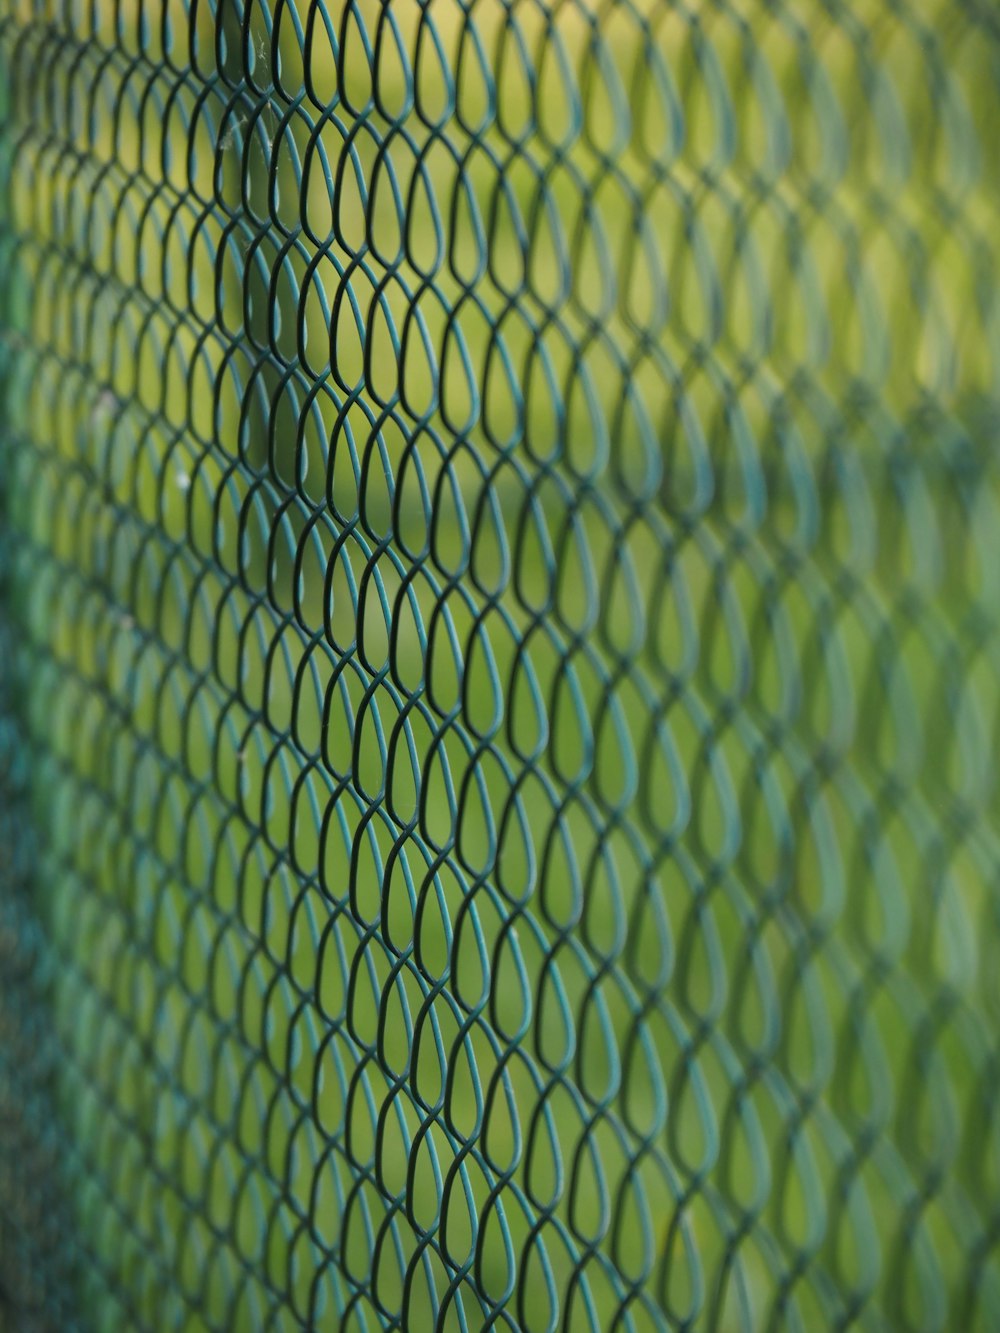 a close up view of a green fence